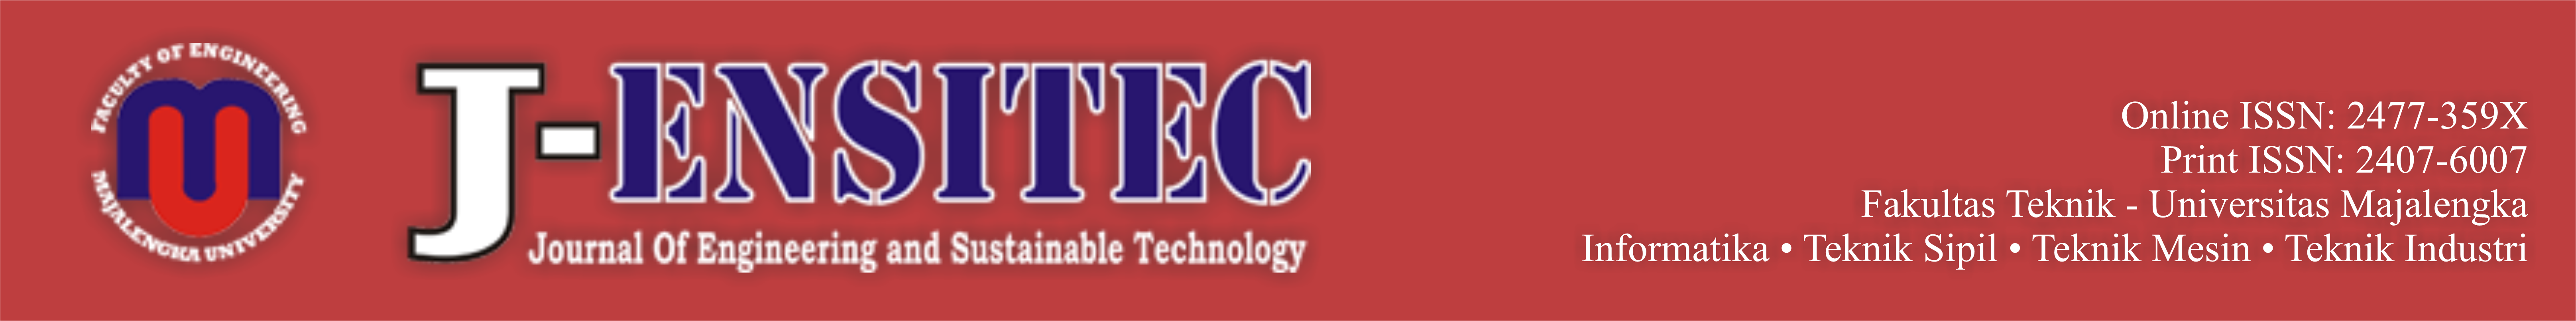 J-ENSITEC (Journal of Engineering and Susatainable Technology)